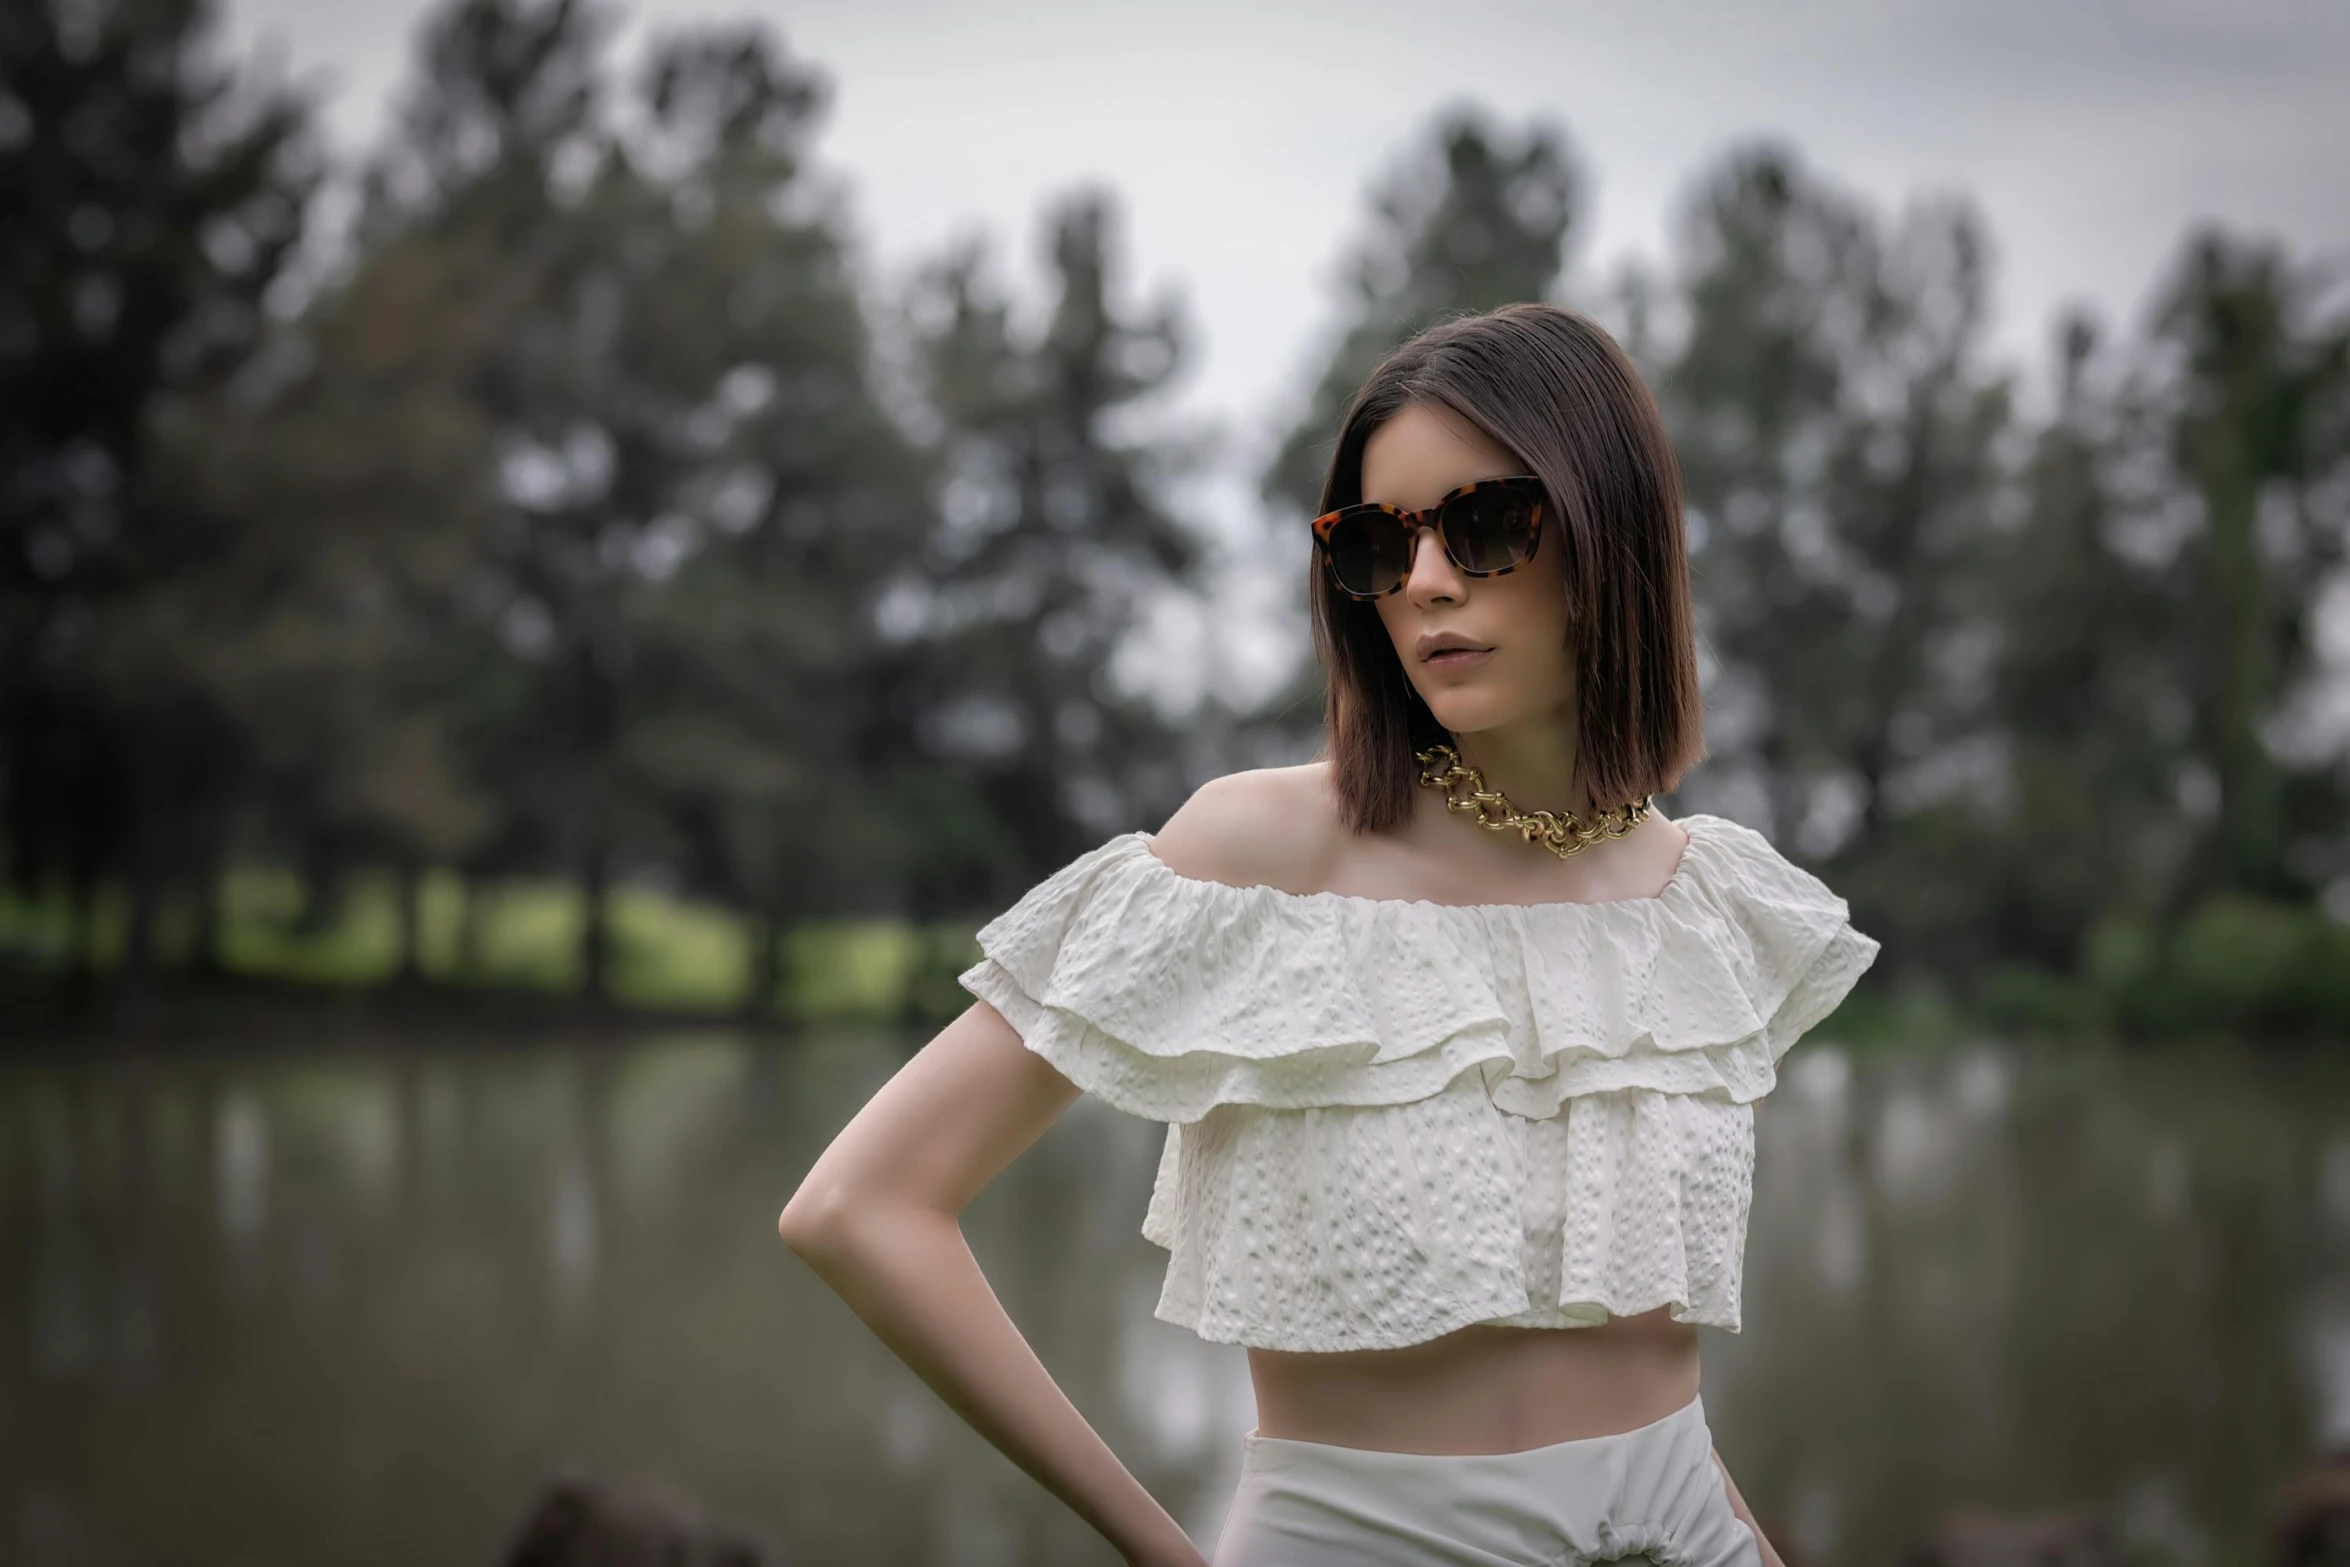 a woman standing in front of a body of water, an album cover, inspired by Elsa Bleda, pexels contest winner, renaissance, fashion model in sunglasses, at a park, ruffles, off the shoulder shirt